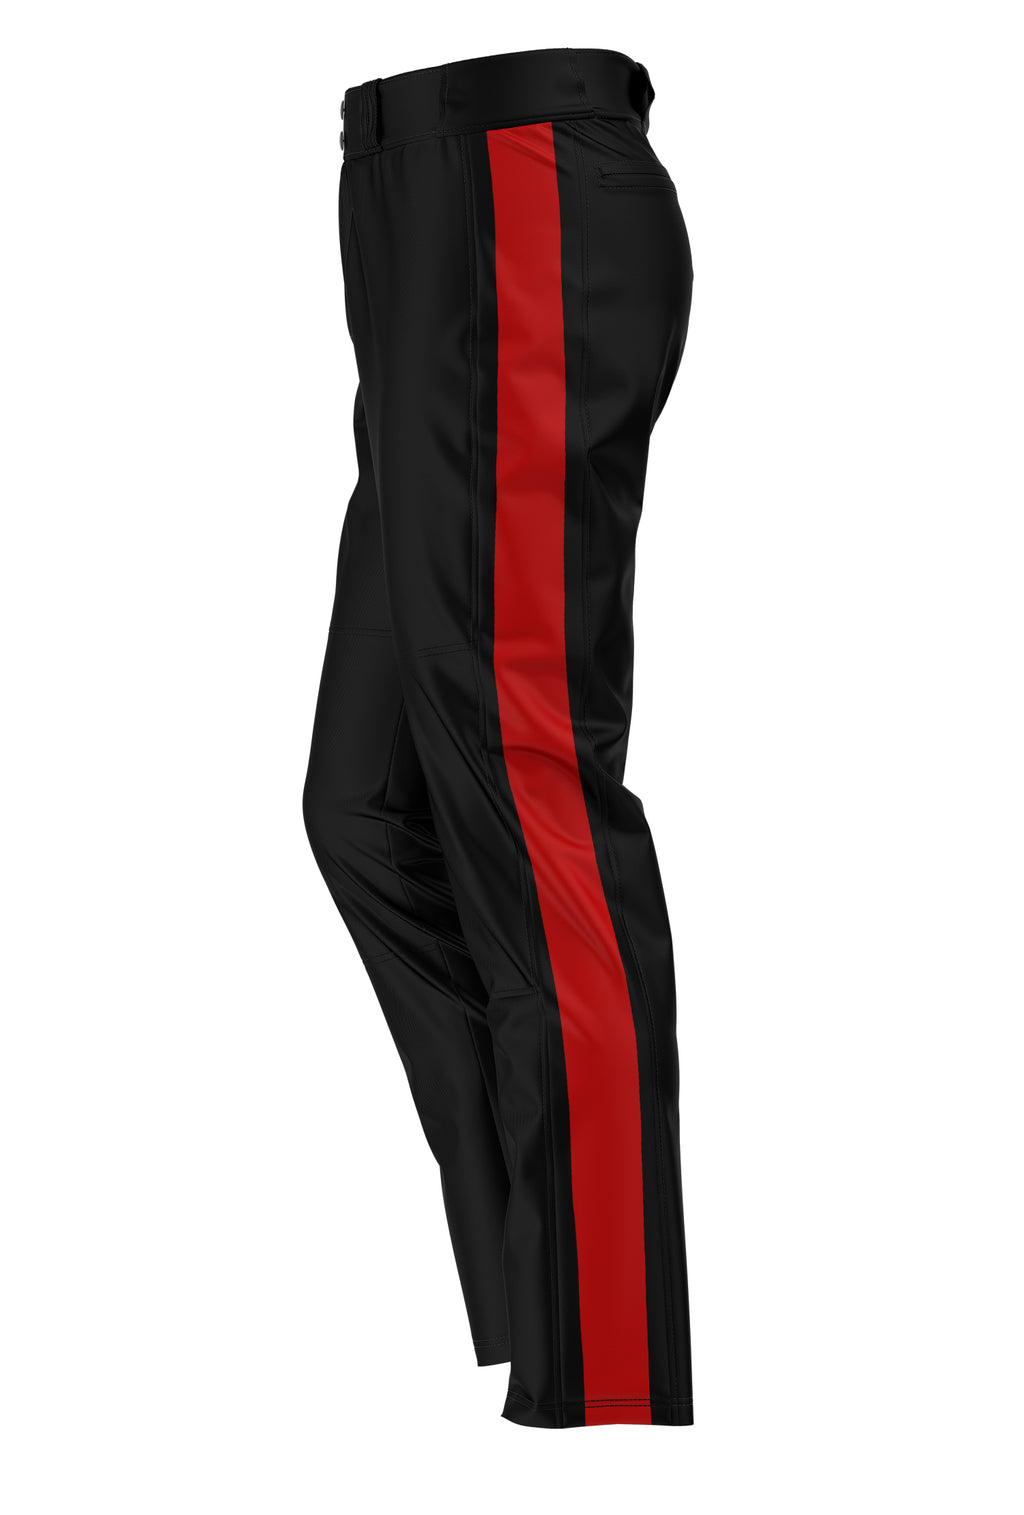 GS Sports Softball Pants - Black with Red Panels